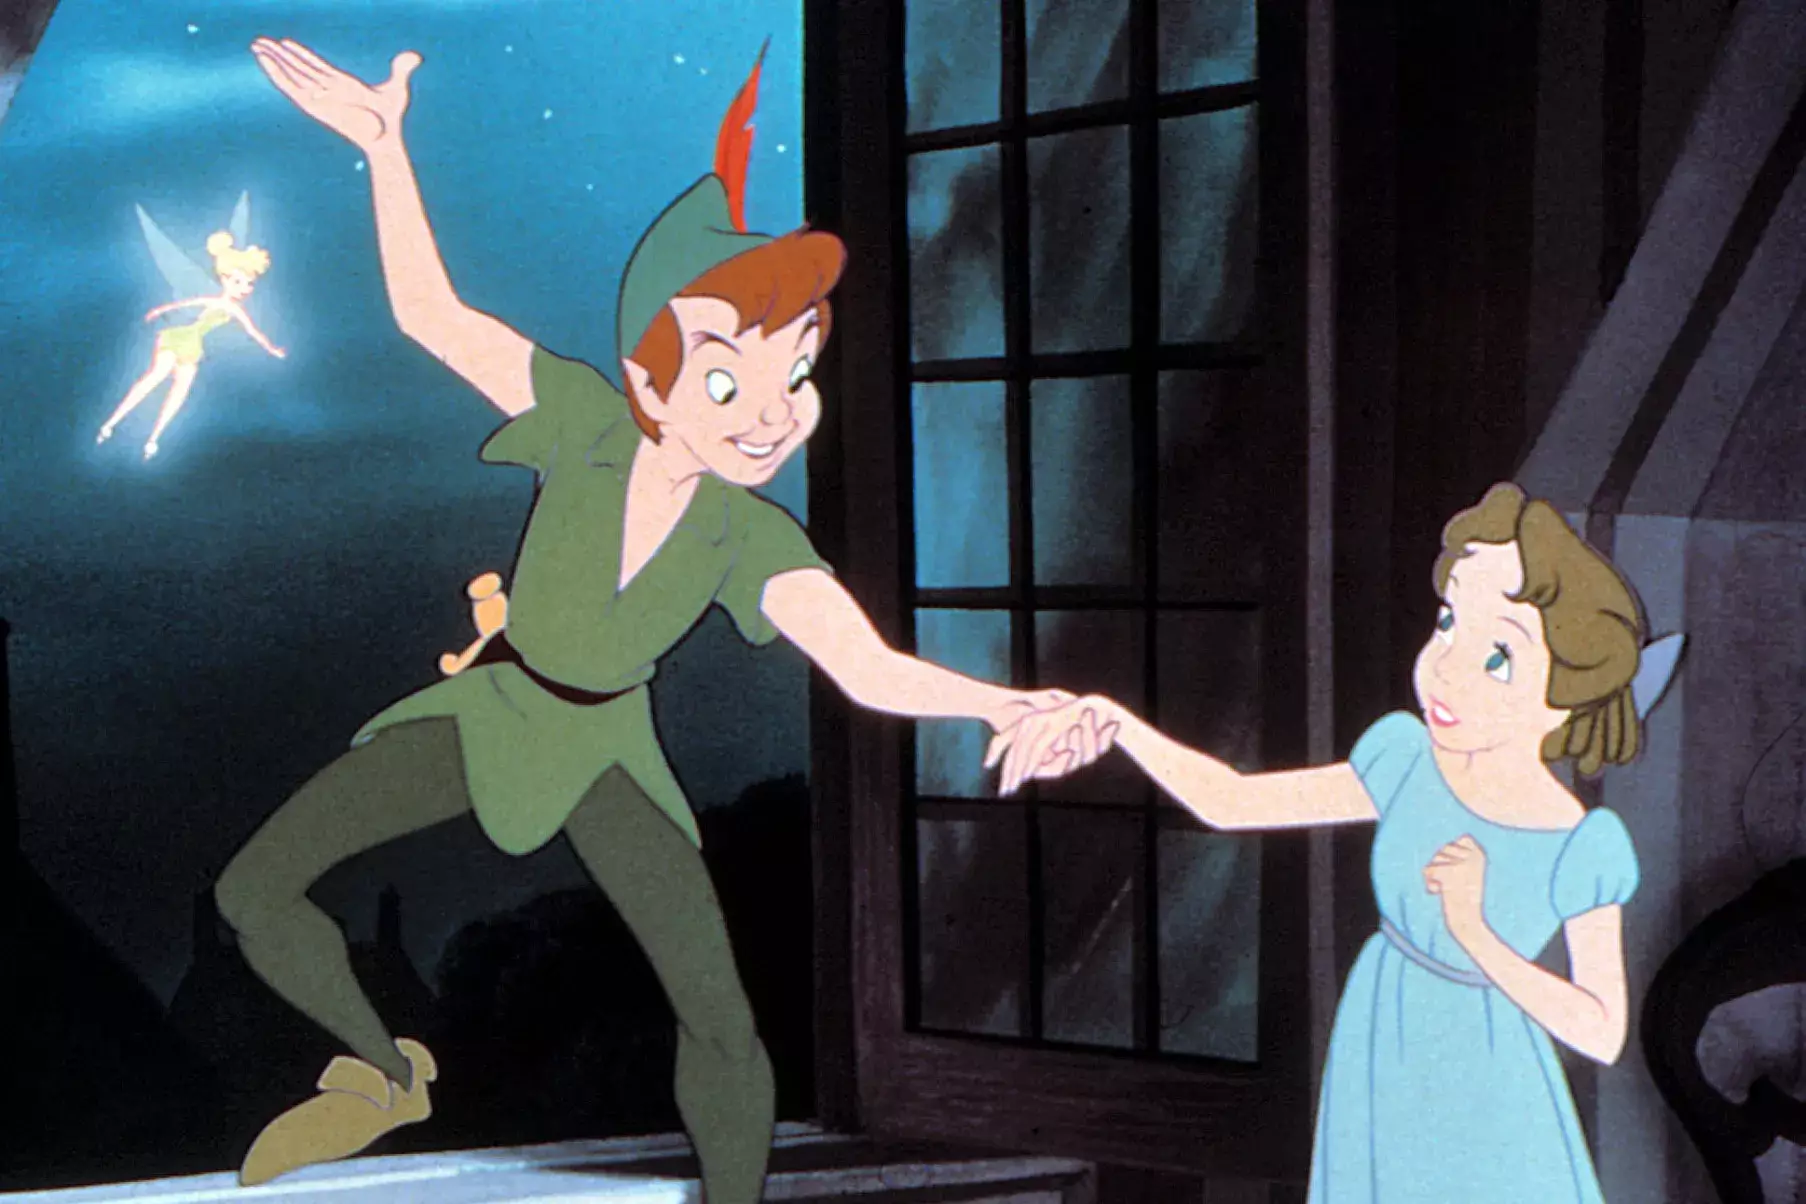 Peter Pan & Wendy is the next Disney classic to get a live-action reboot (